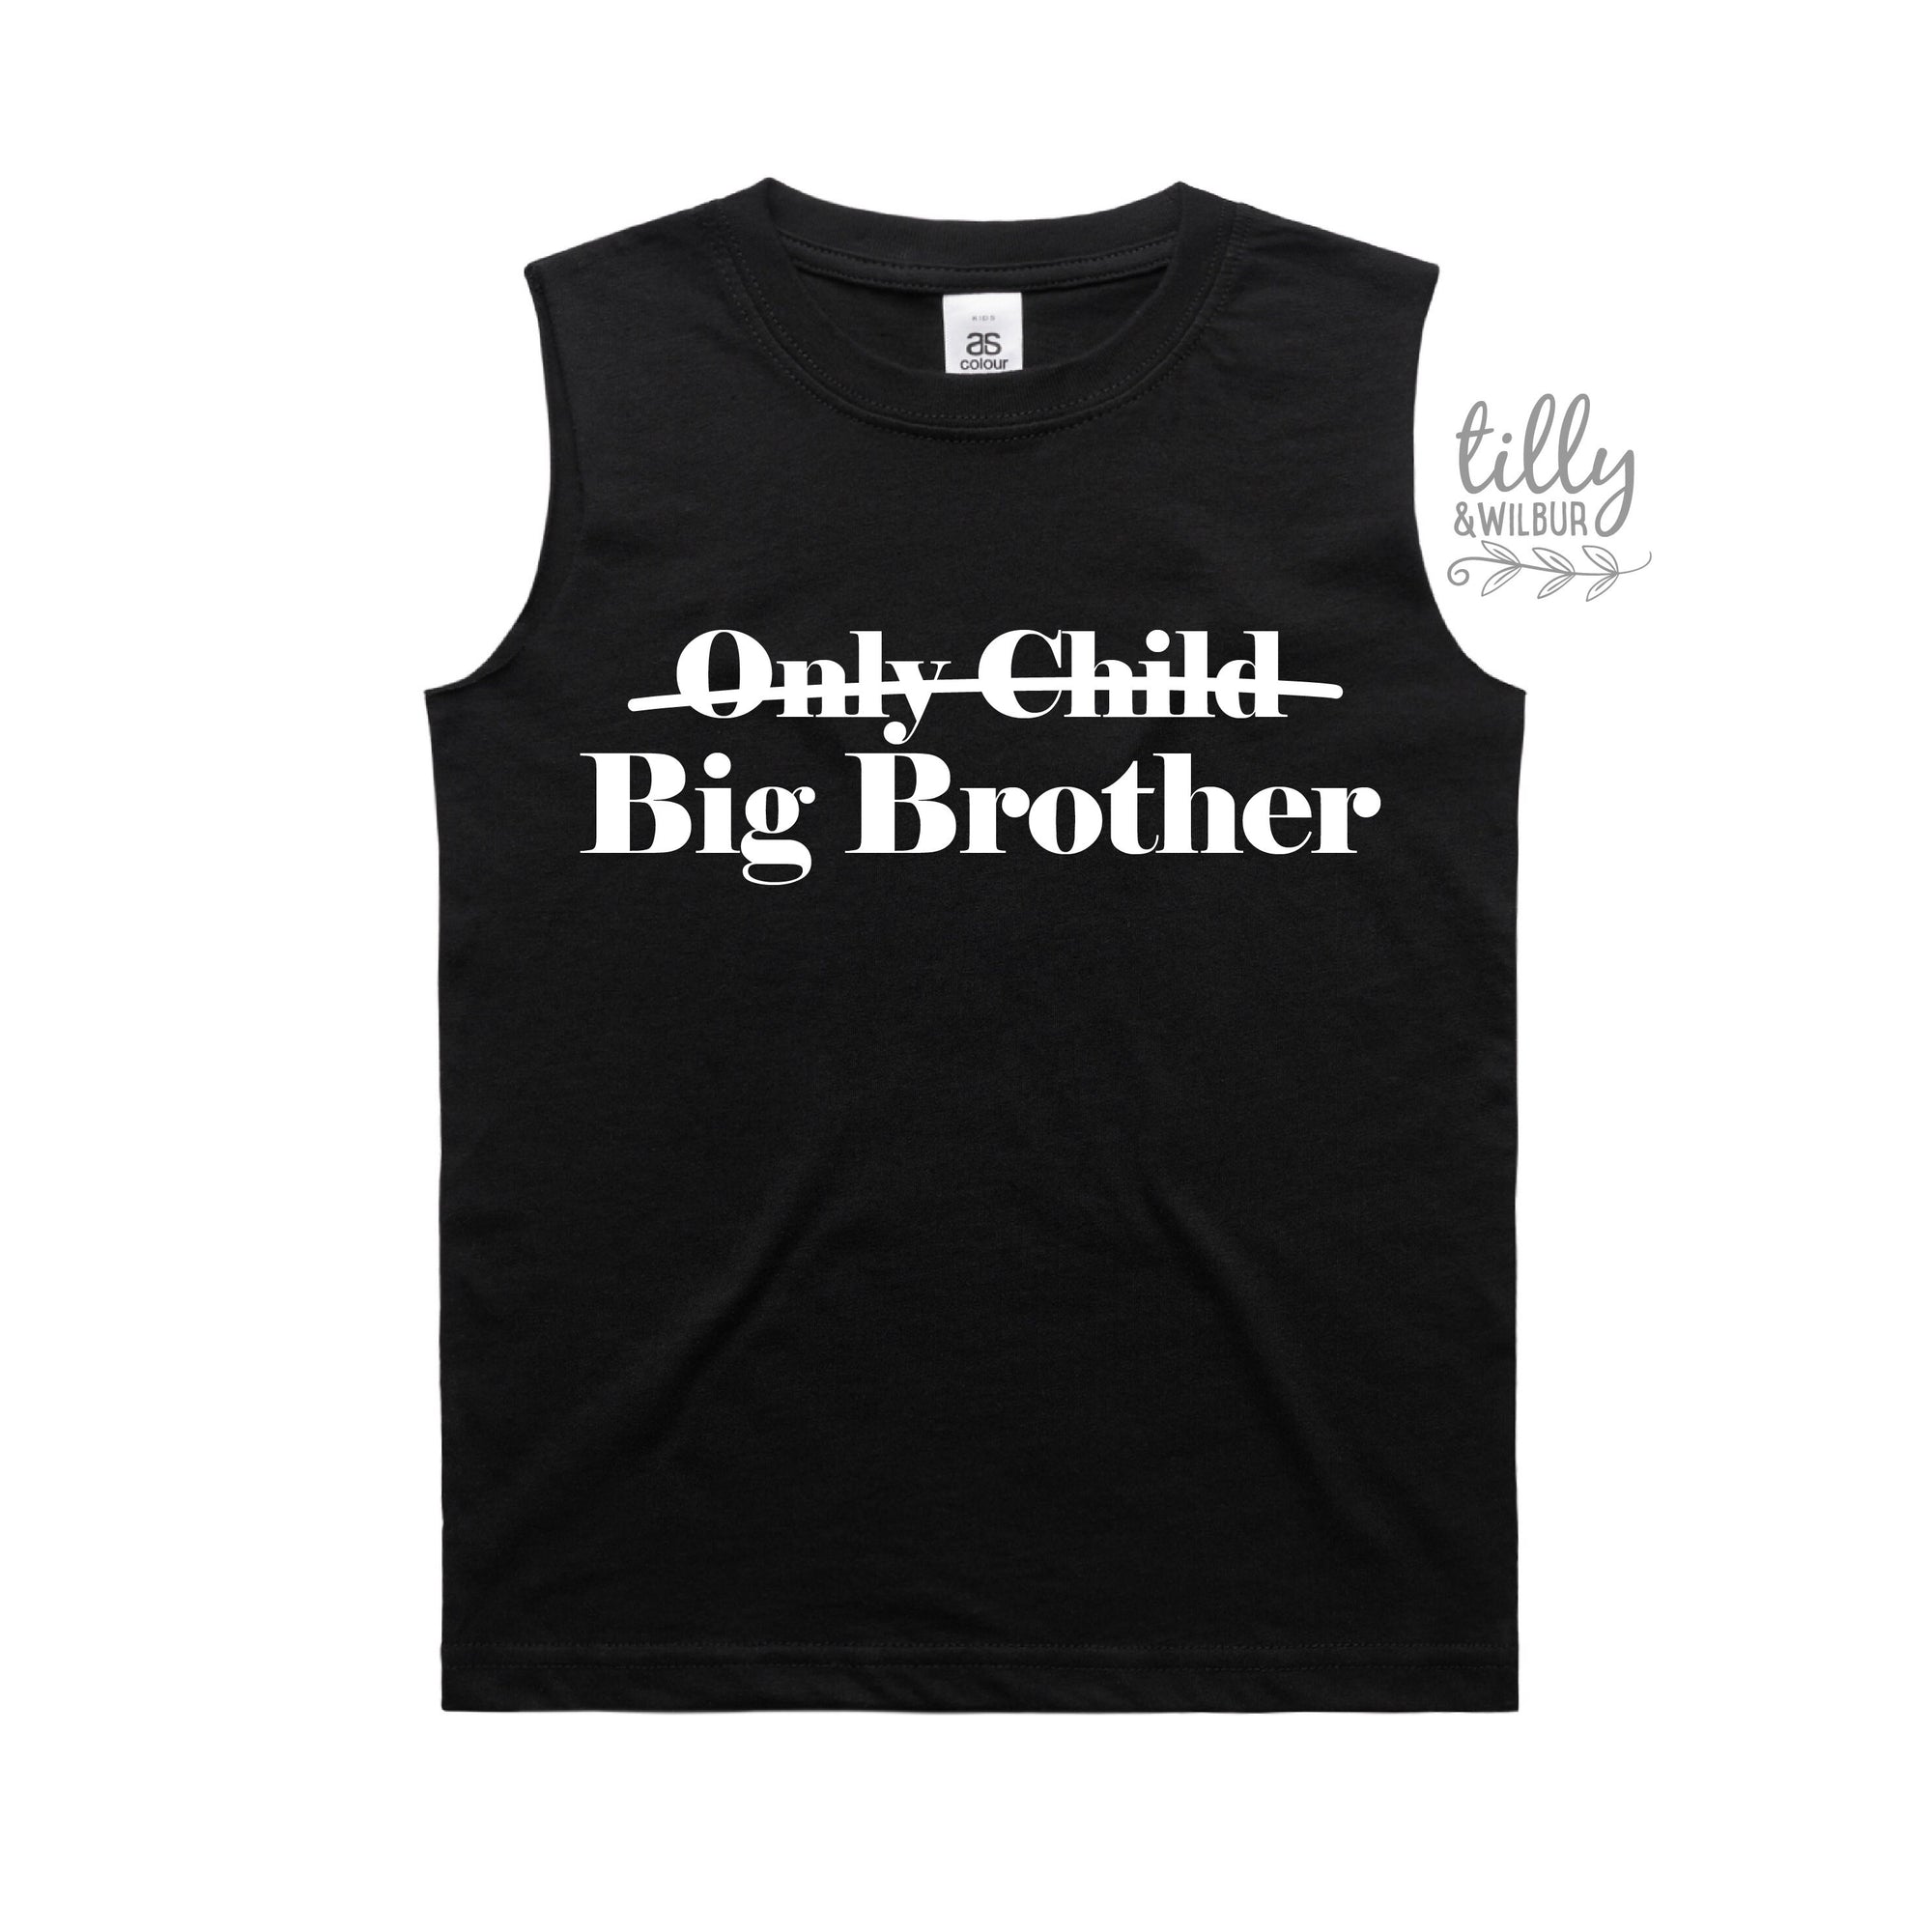 Only Child Big Brother T-Shirt For Boys, Future Big Brother T-Shirt For Boys, Big Brother Announcement Gift, Pregnancy Announcement Shirt